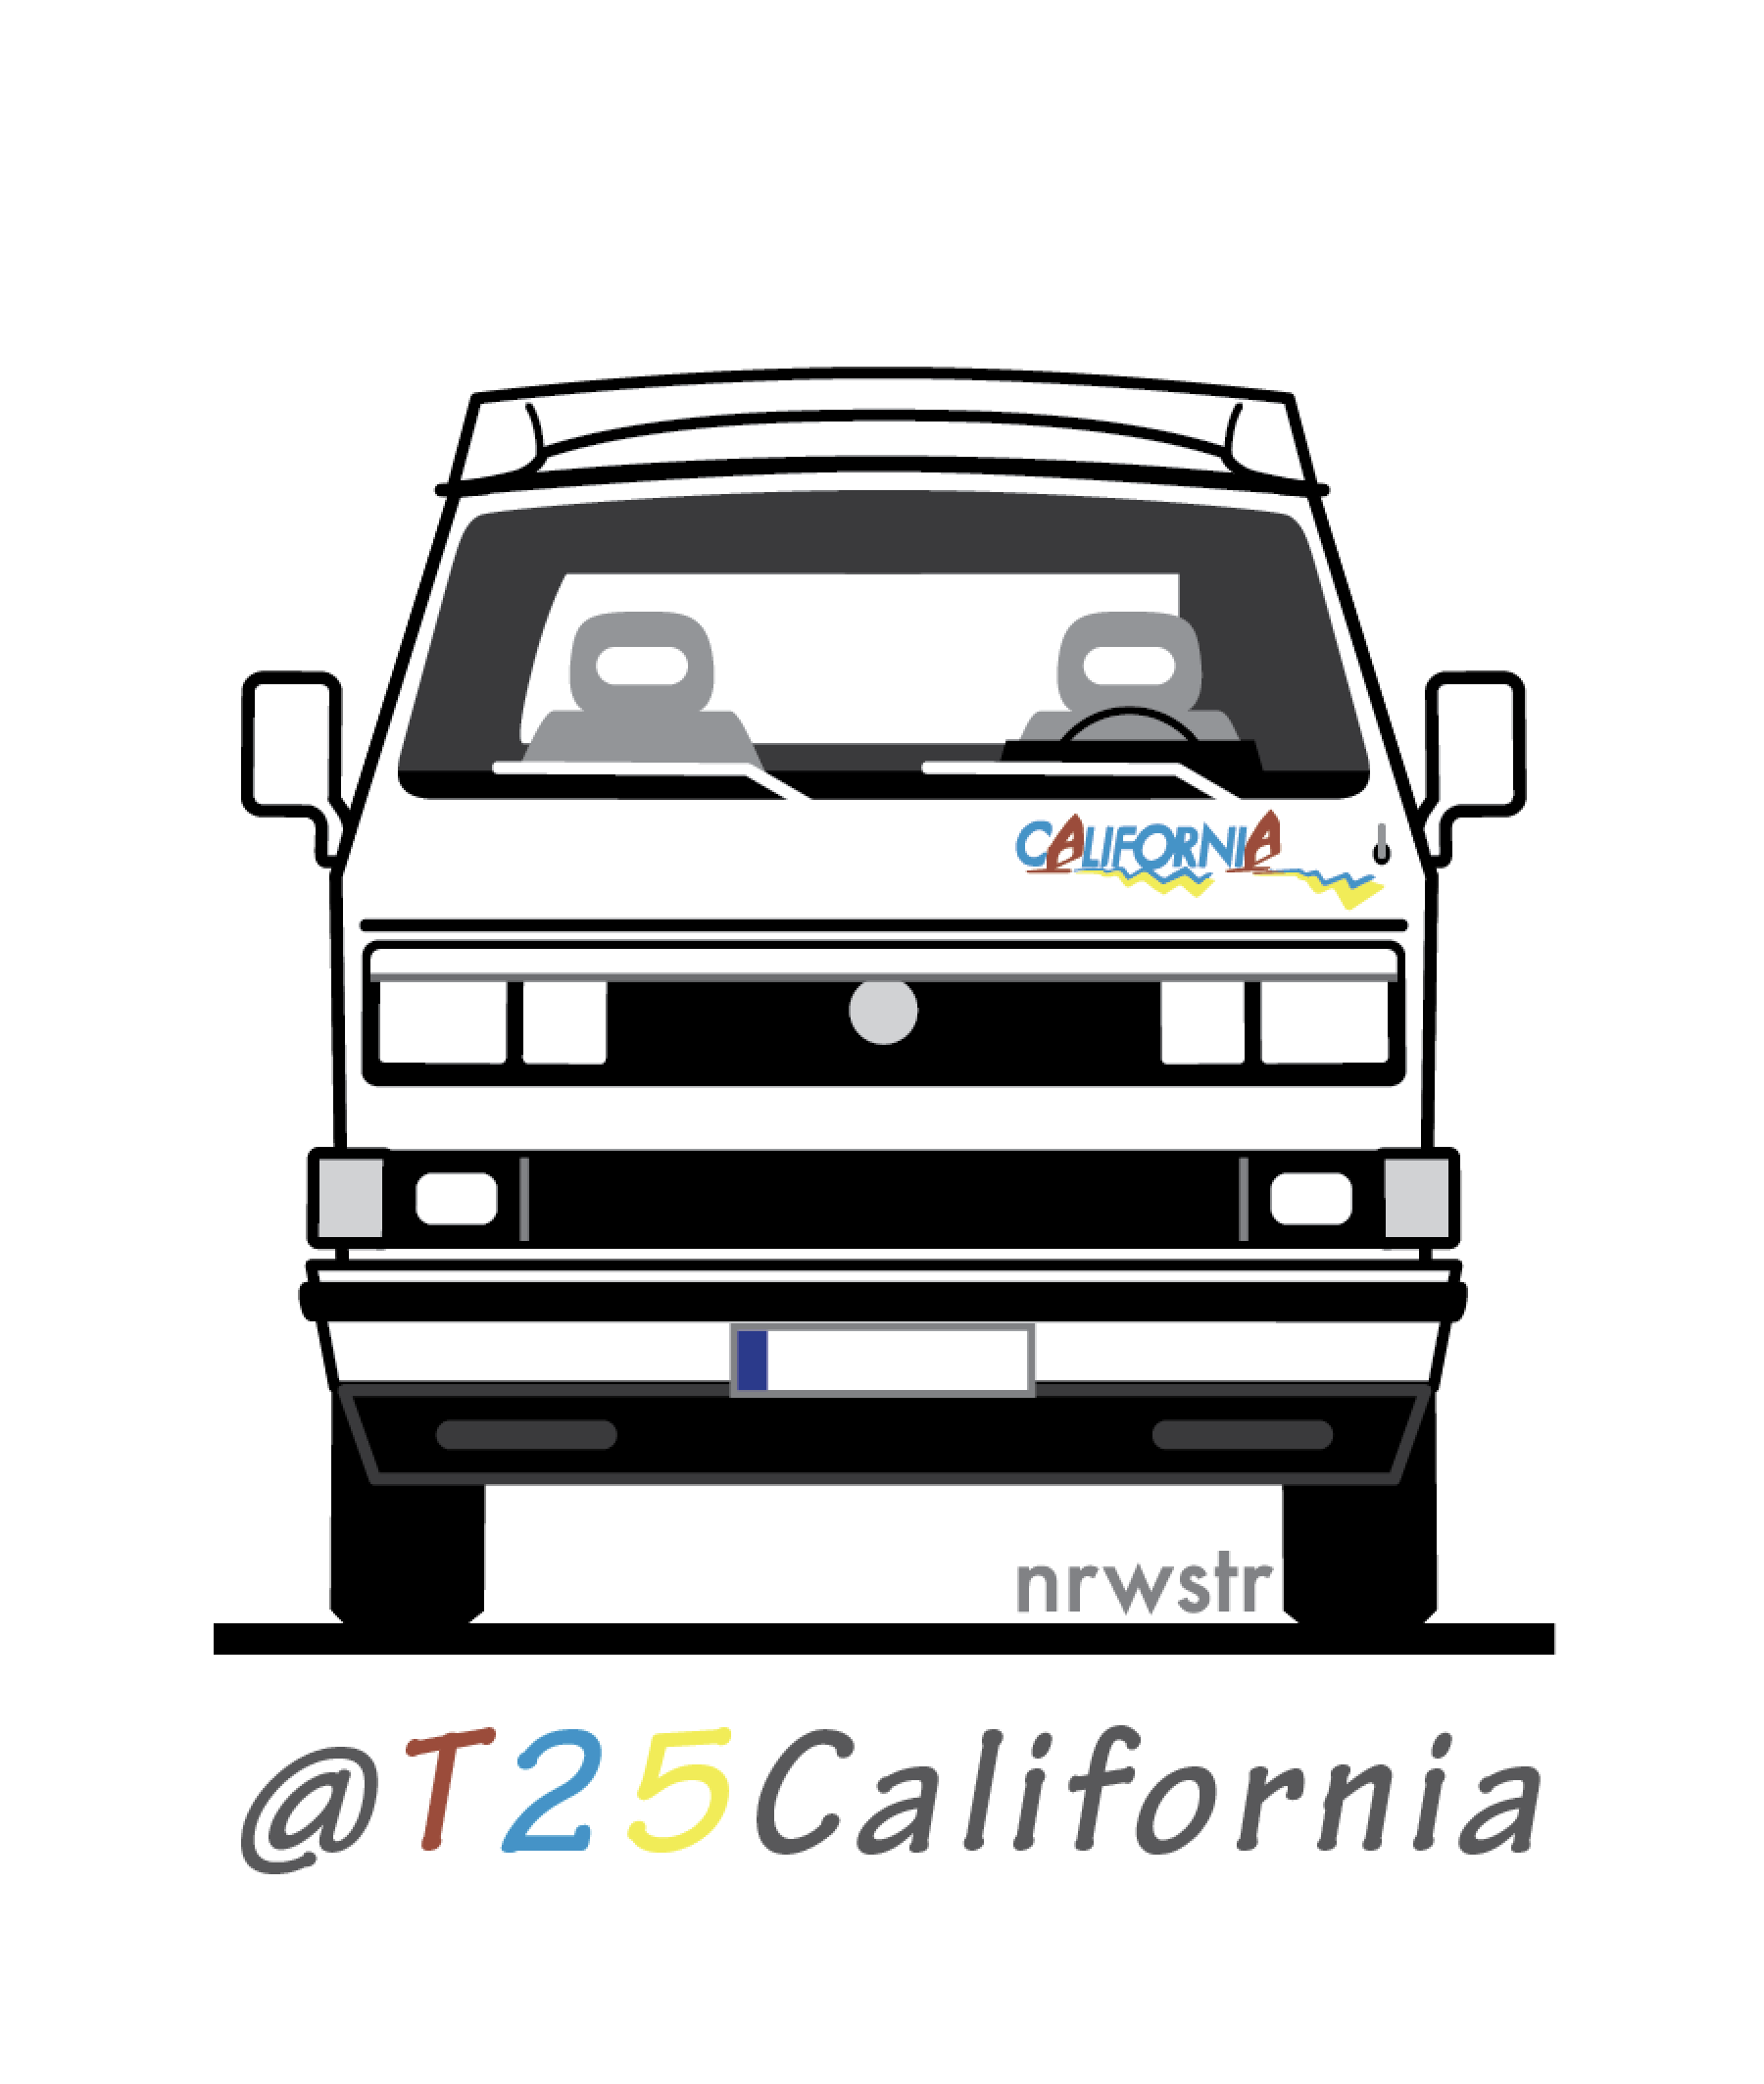 comm-t25california front view.png